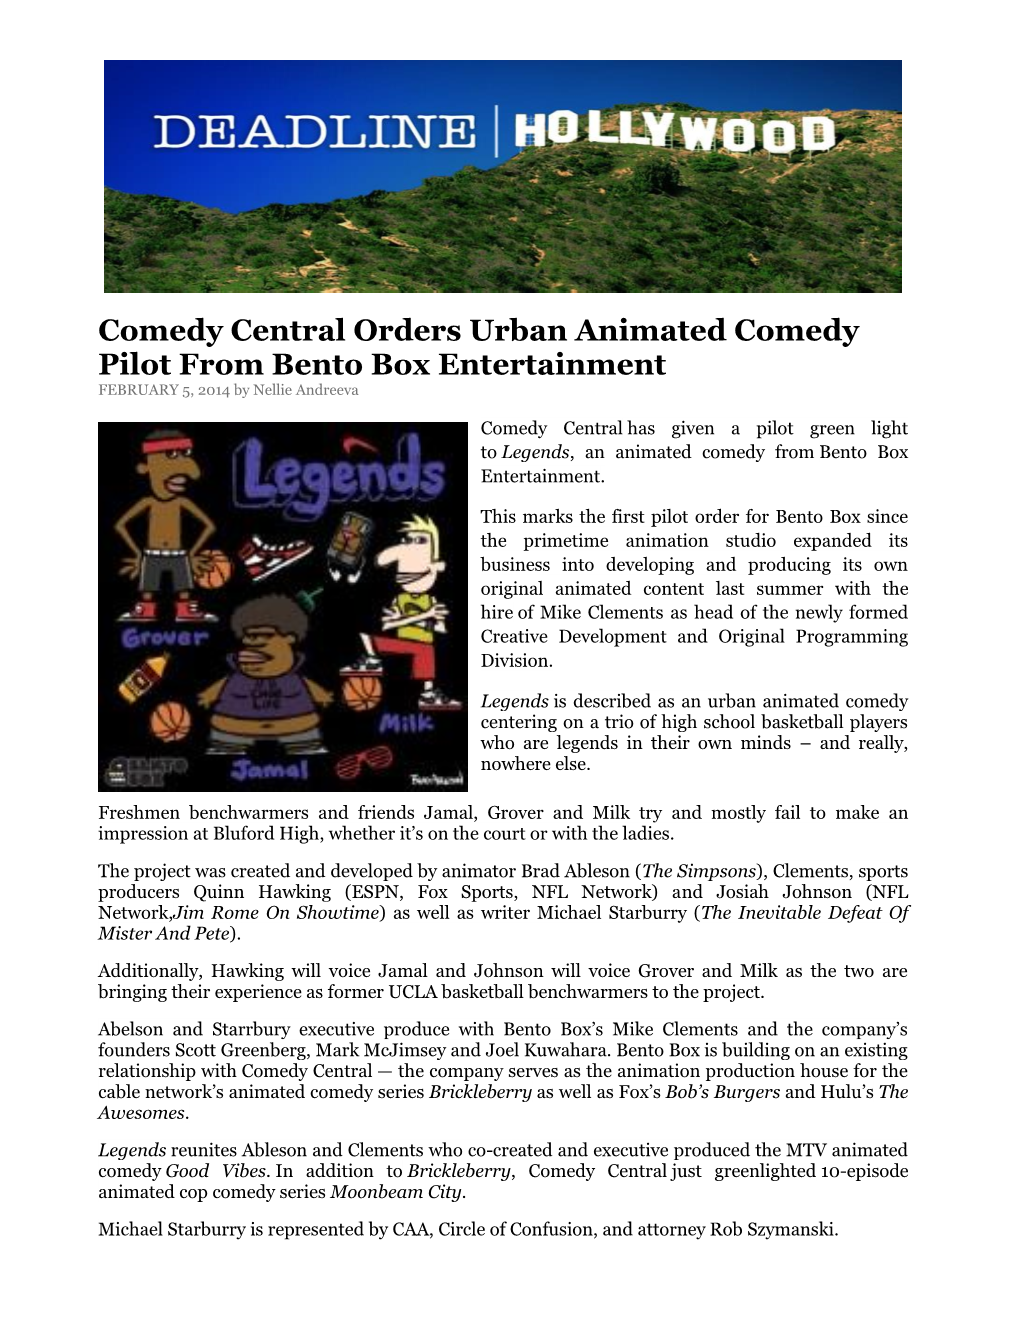 Comedy Central Orders Urban Animated Comedy Pilot from Bento Box Entertainment FEBRUARY 5, 2014 by Nellie Andreeva